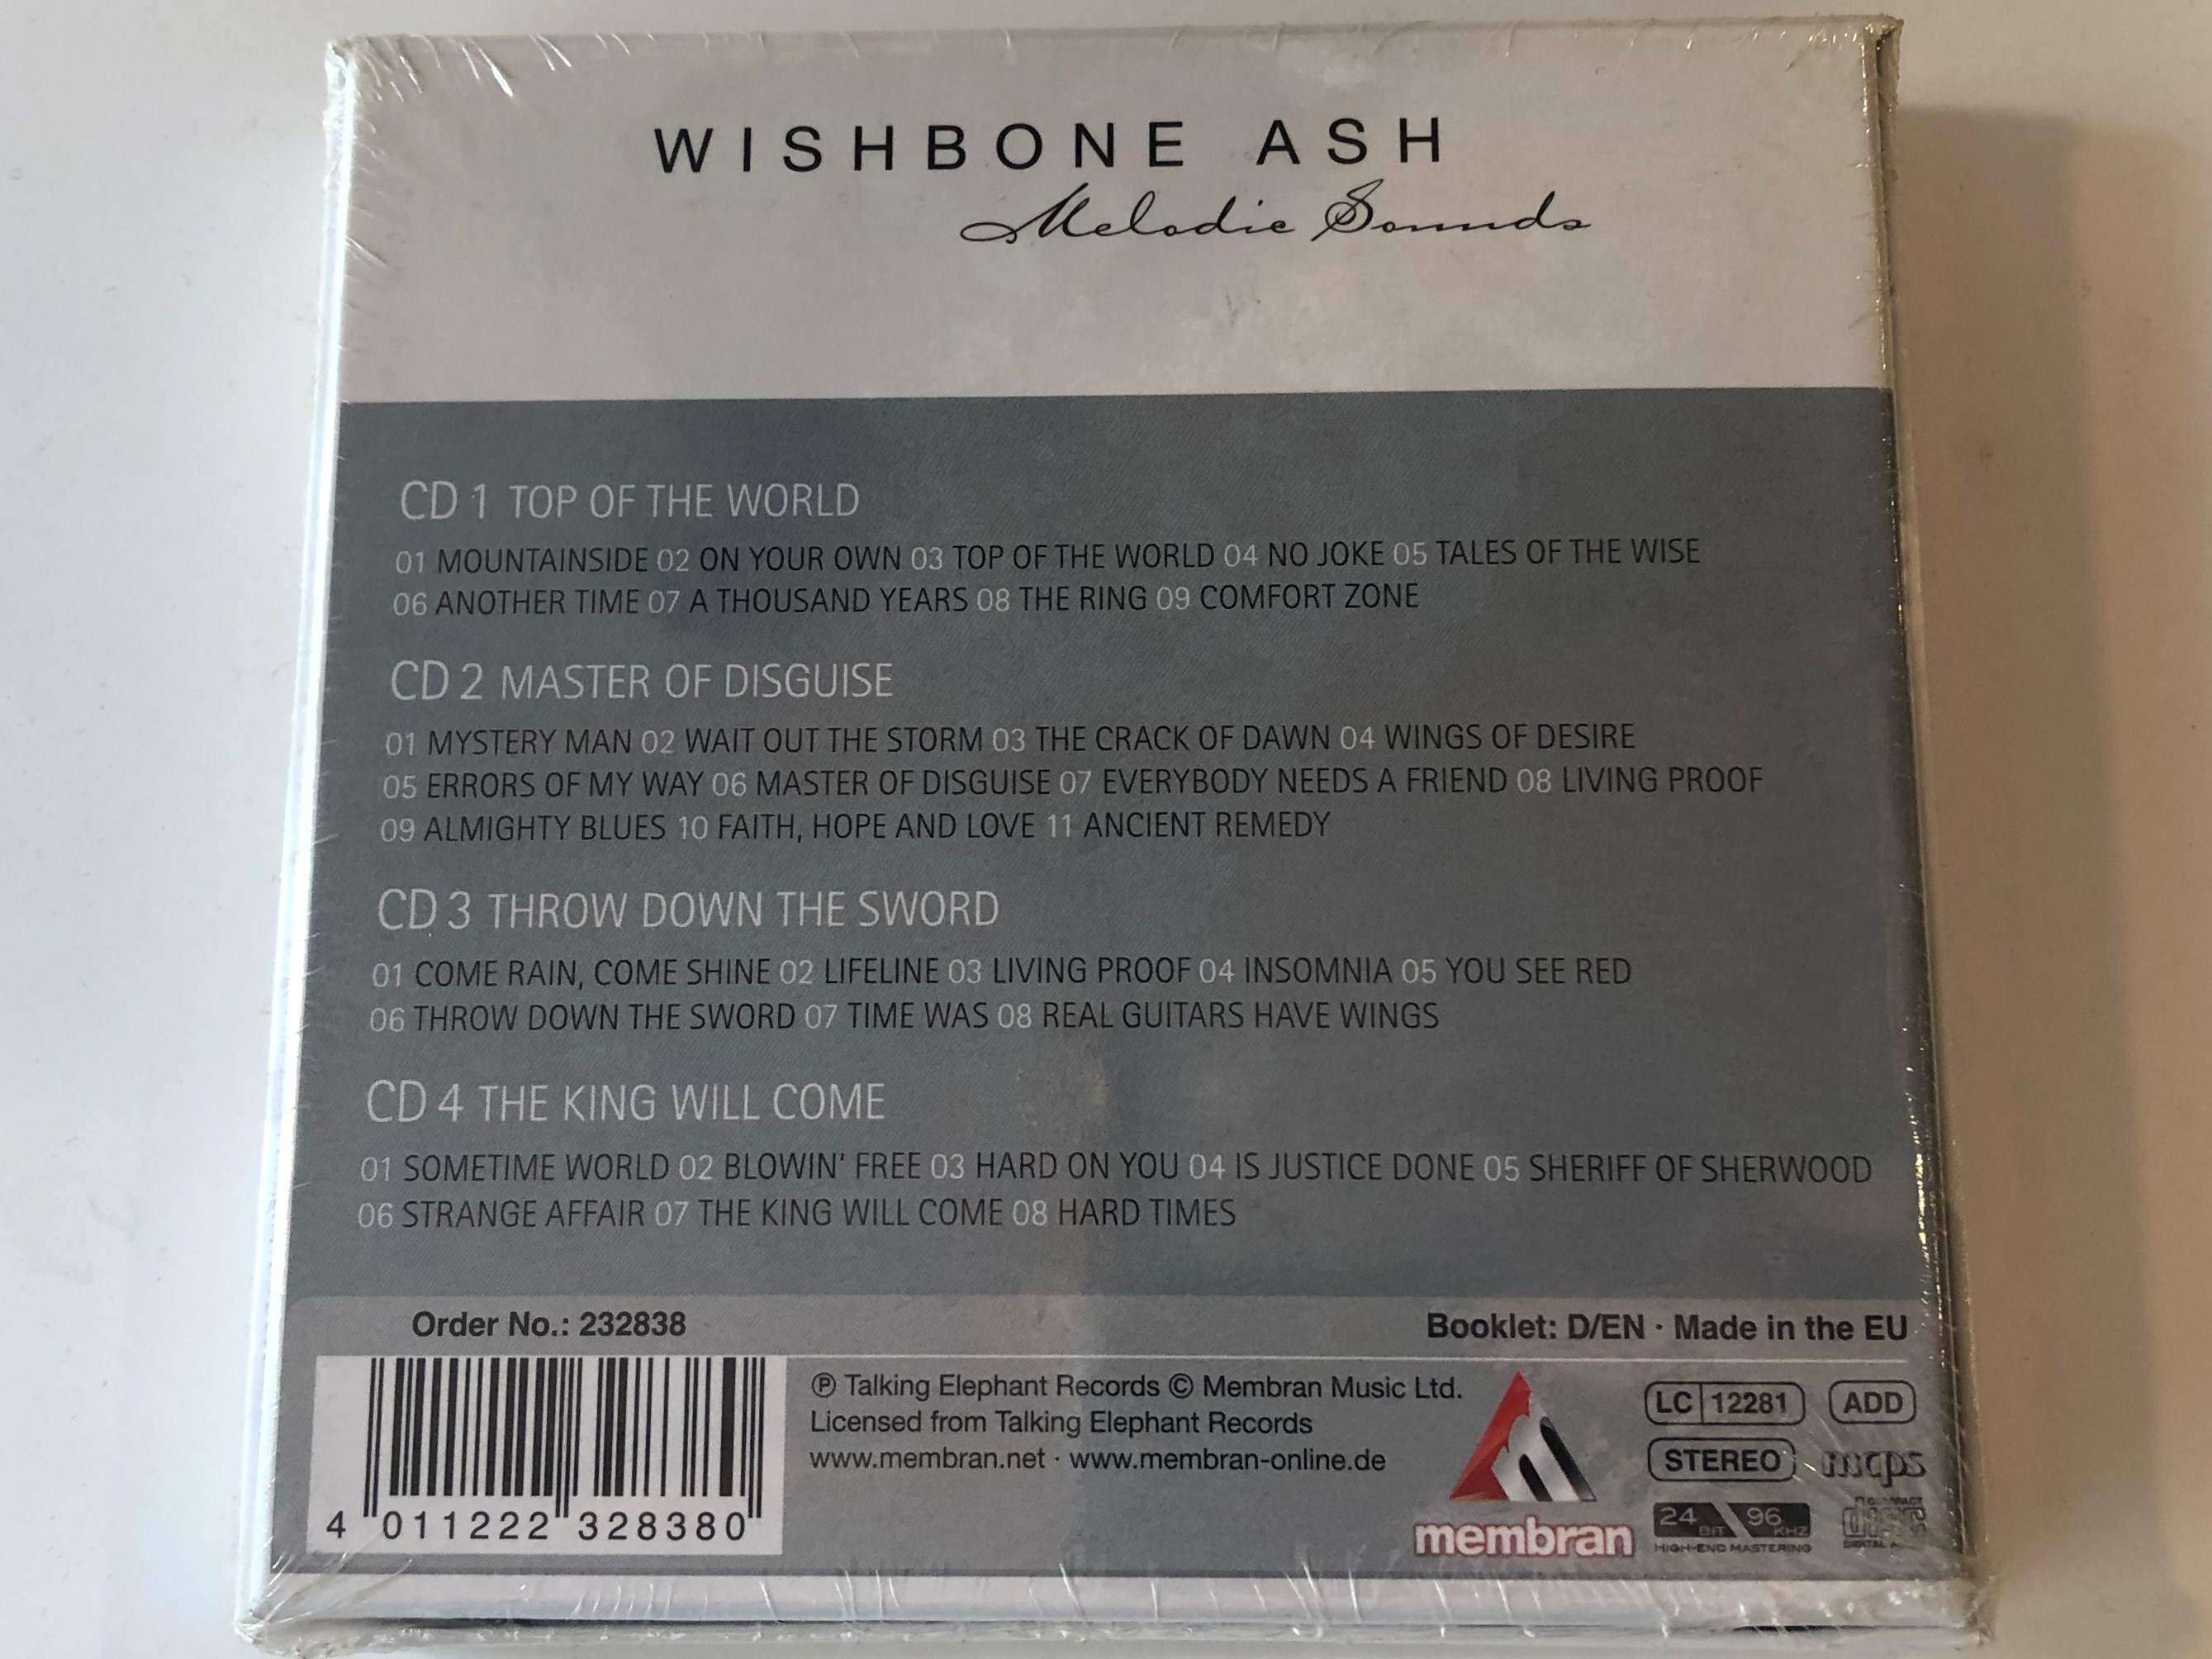 wishbone-ash-melodic-sounds-also-includes-live-recordings-membran-music-ltd.-4x-audio-cd-stereo-232838-2-.jpg